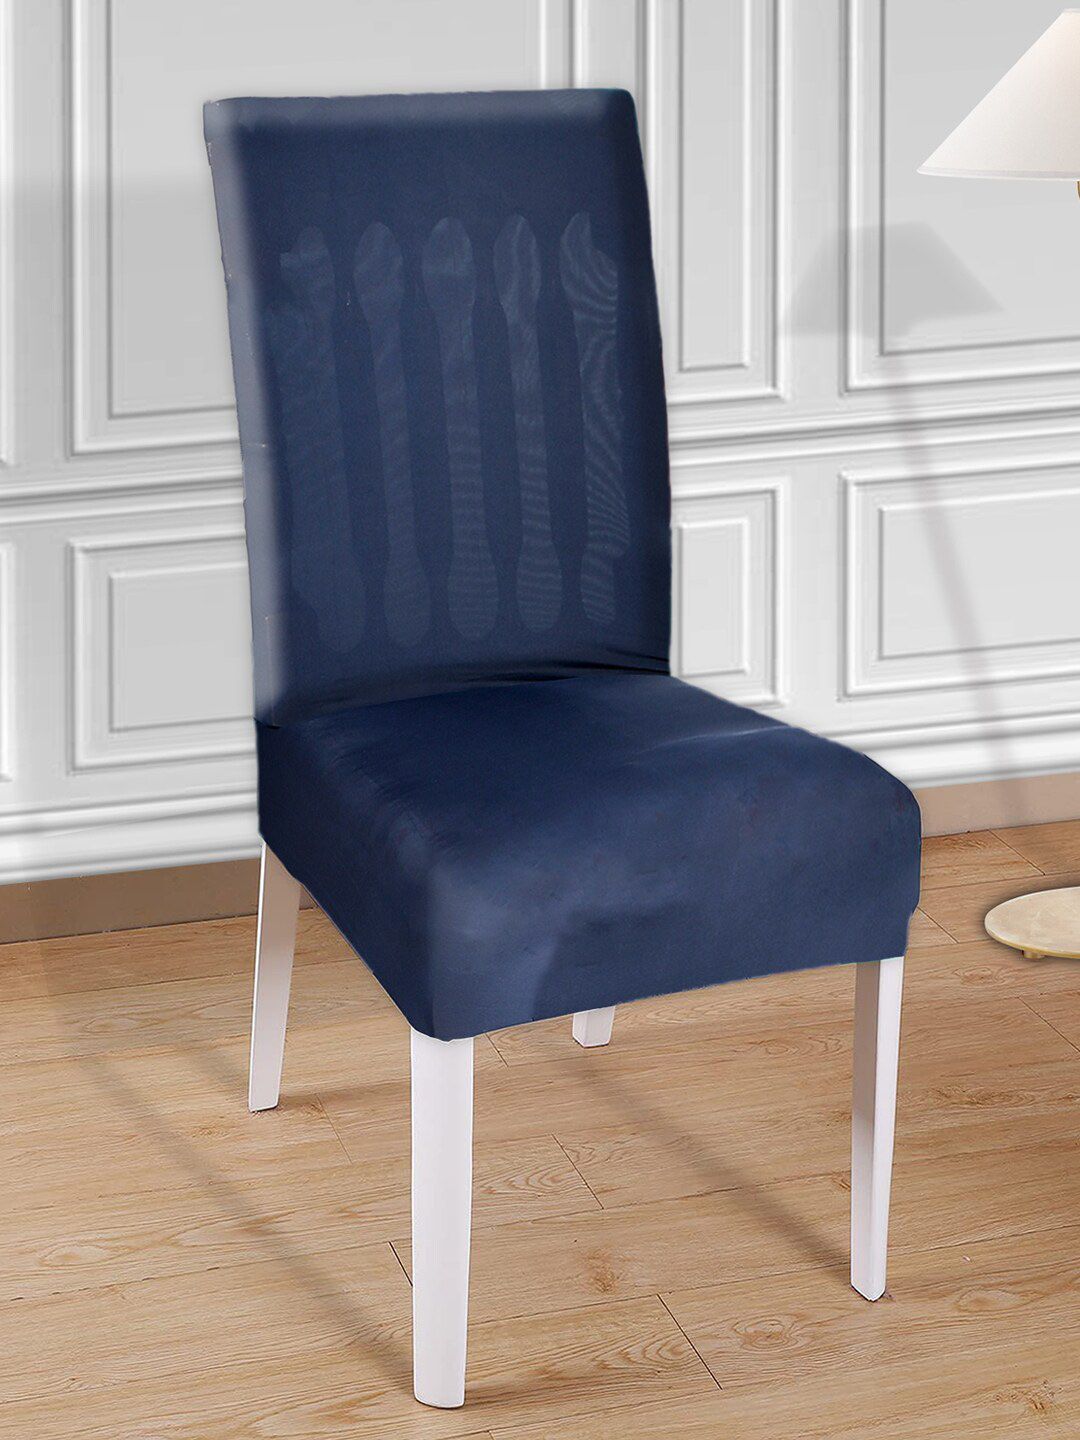 Kuber Industries Set Of 4 Blue Solid Chair Covers Price in India